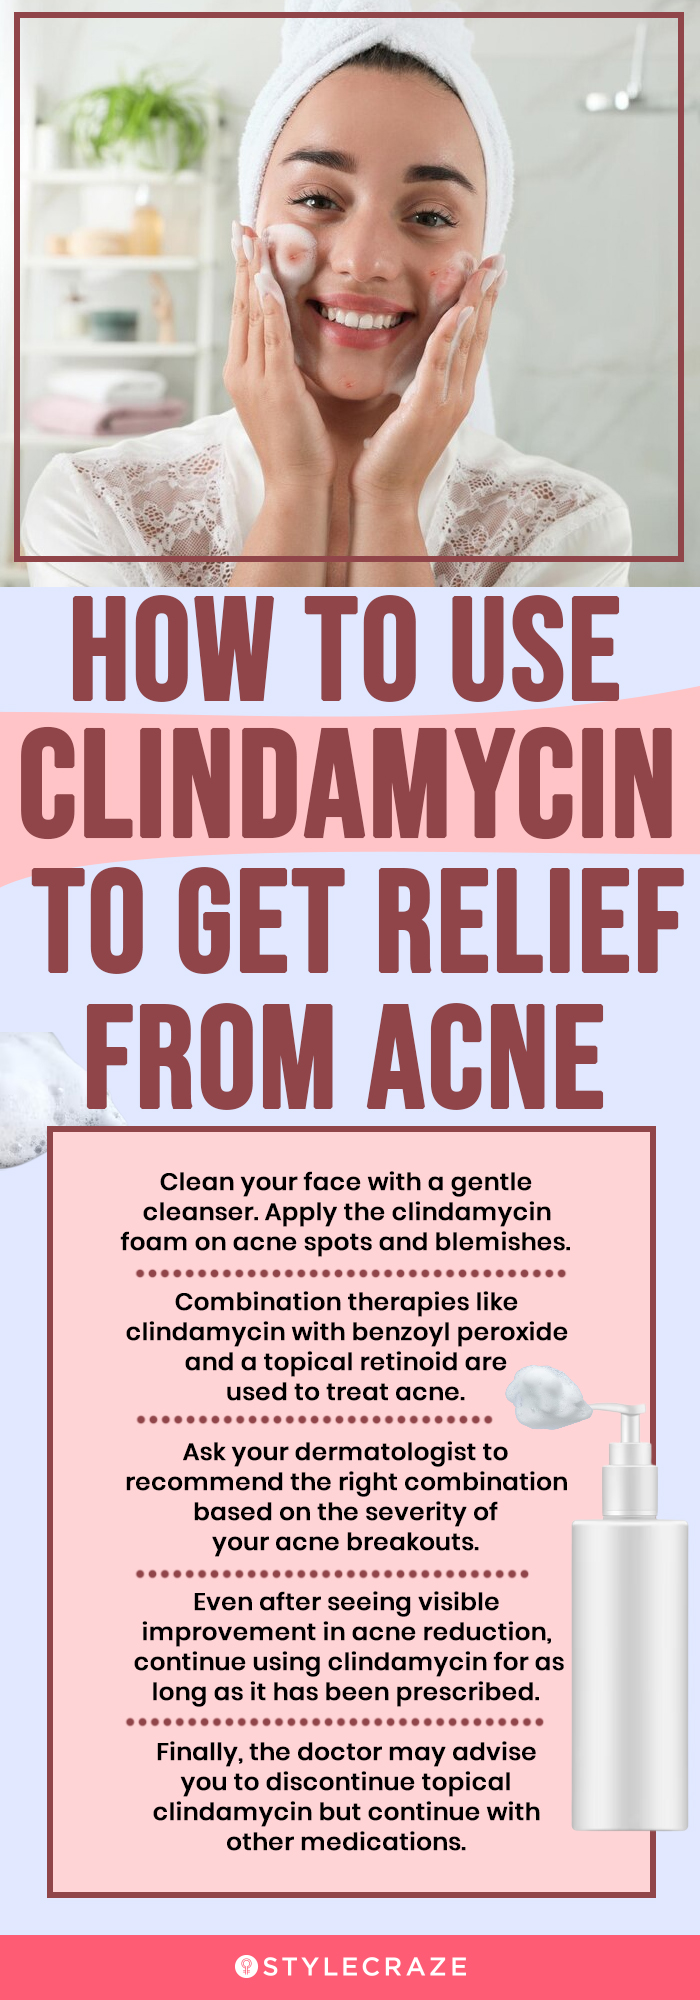 how to use clindamycin for acne (infographic)